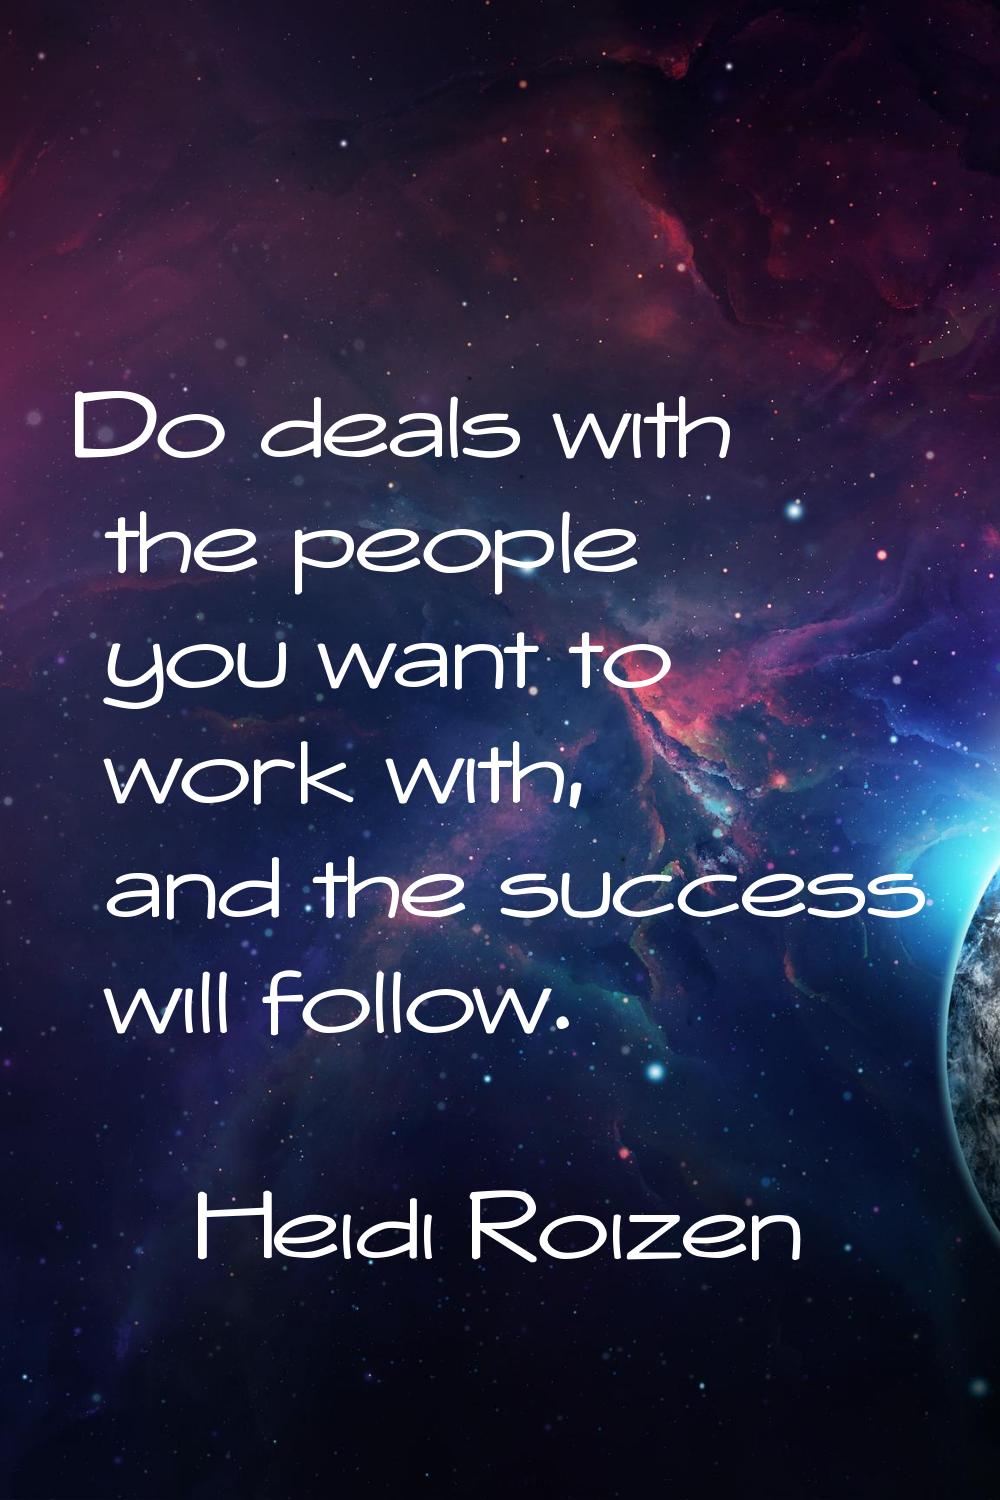 Do deals with the people you want to work with, and the success will follow.